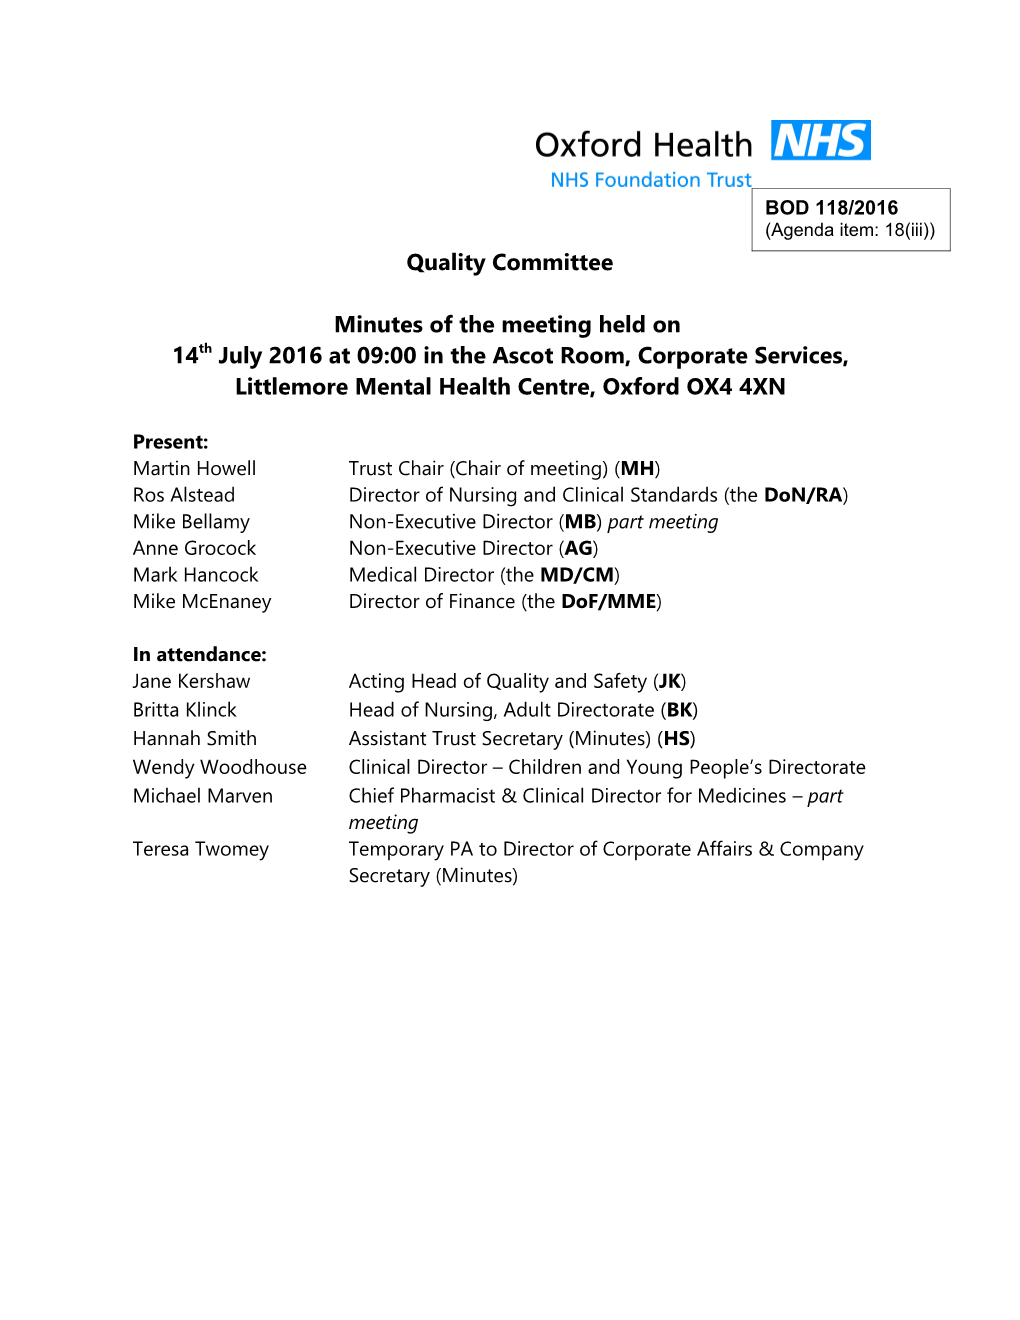 Minutes of the Quality Committee,14 July 2016